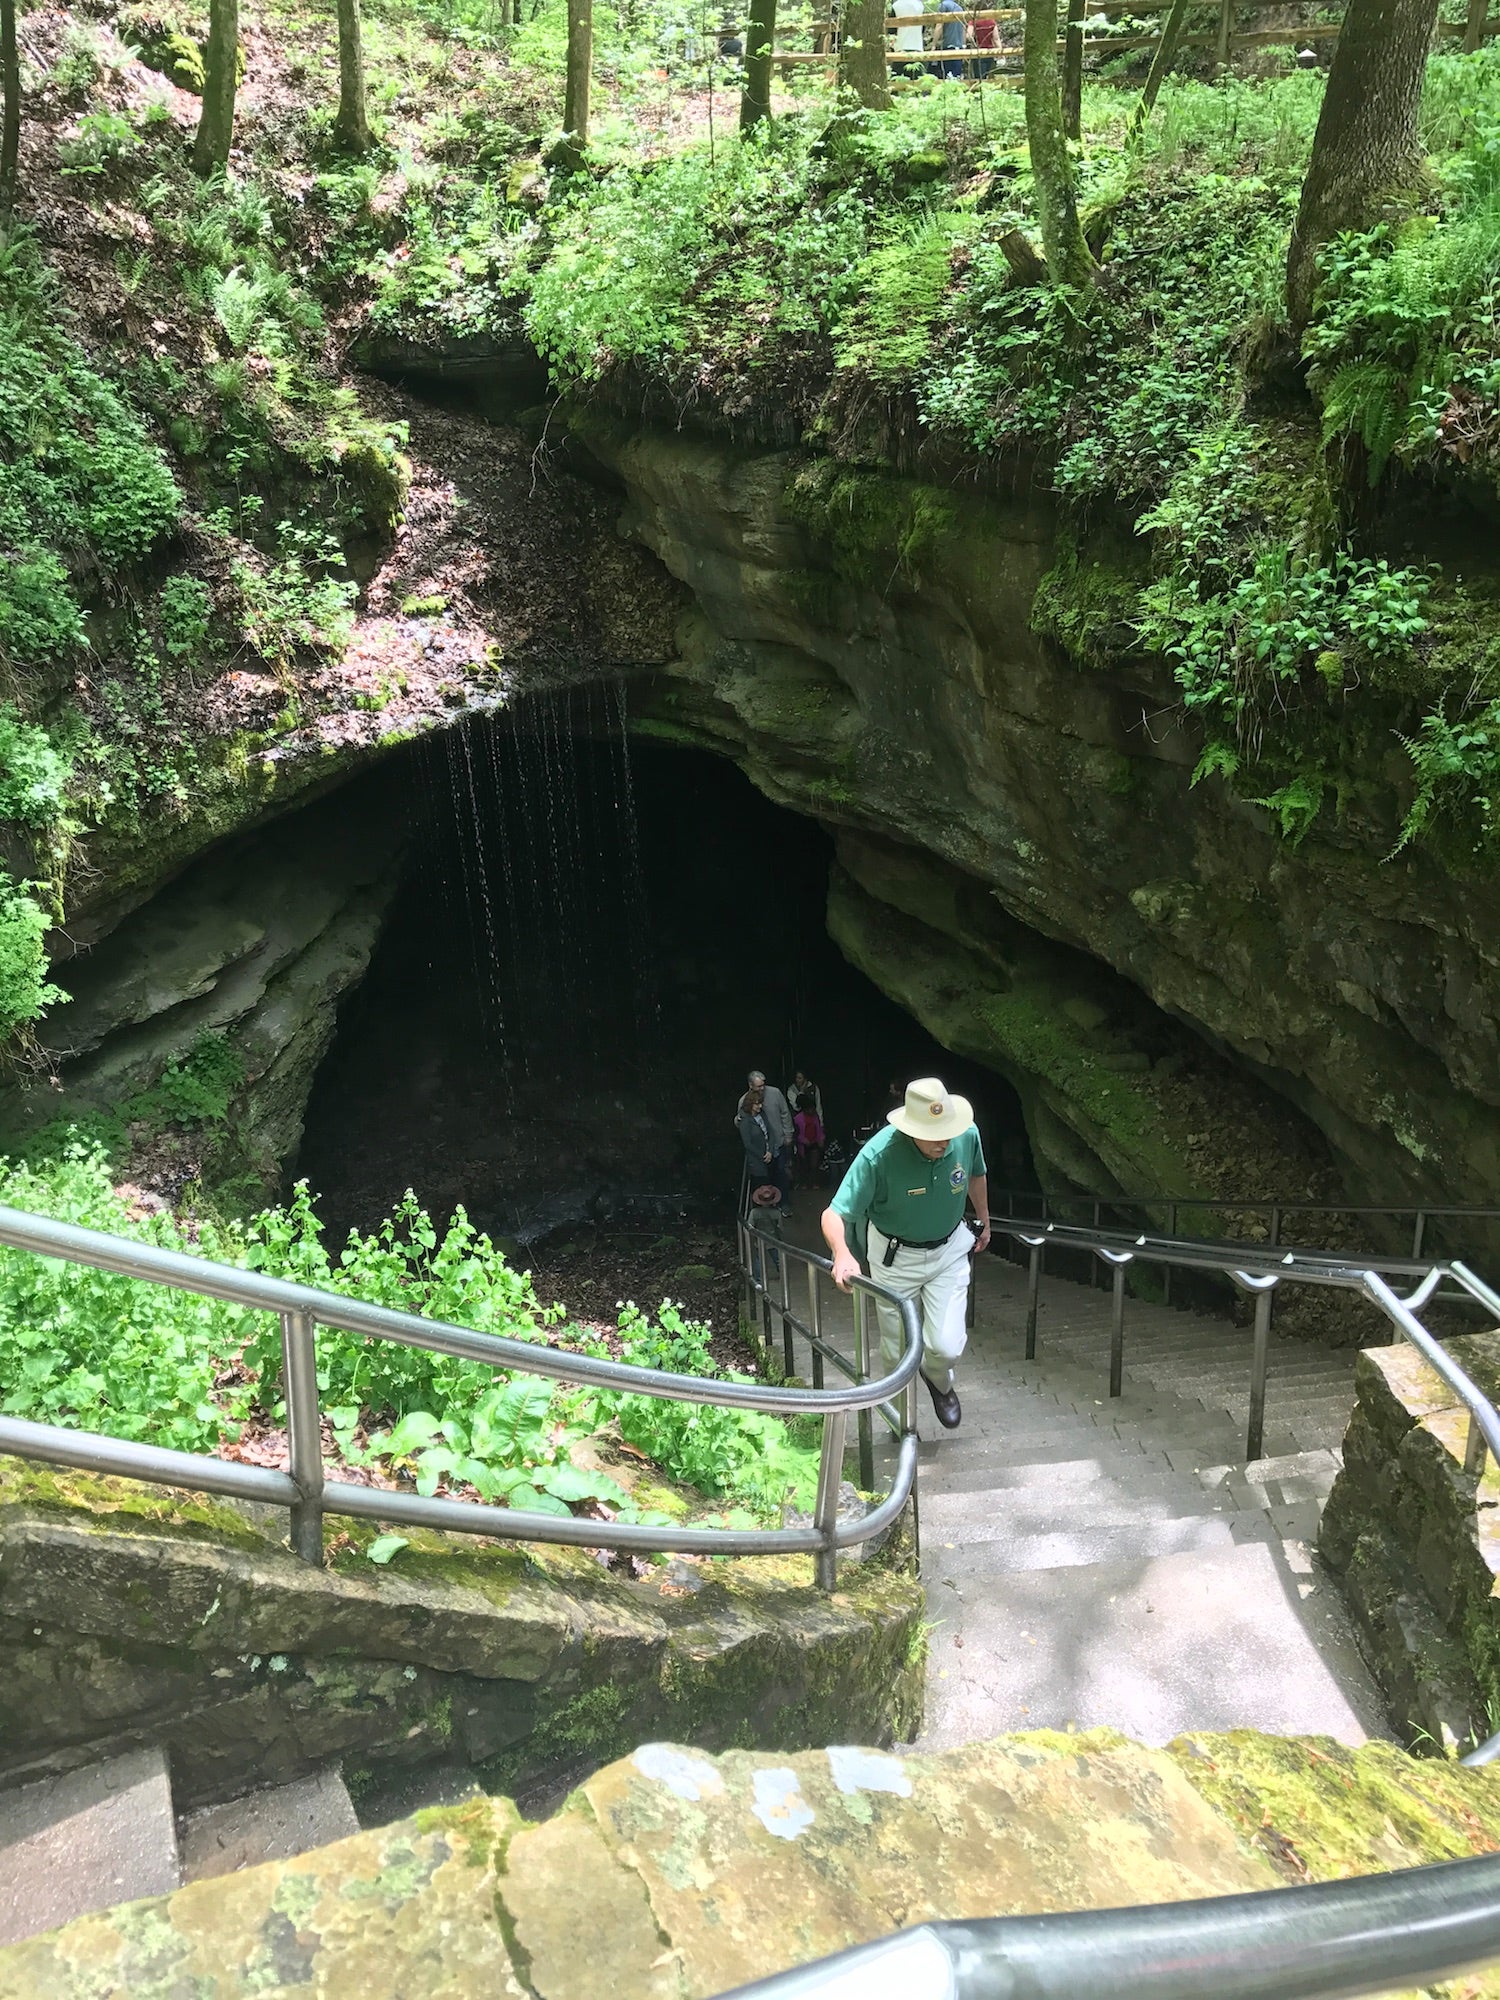 Camping At Mammoth Cave Will Show You A Whole New Side Of Kentucky